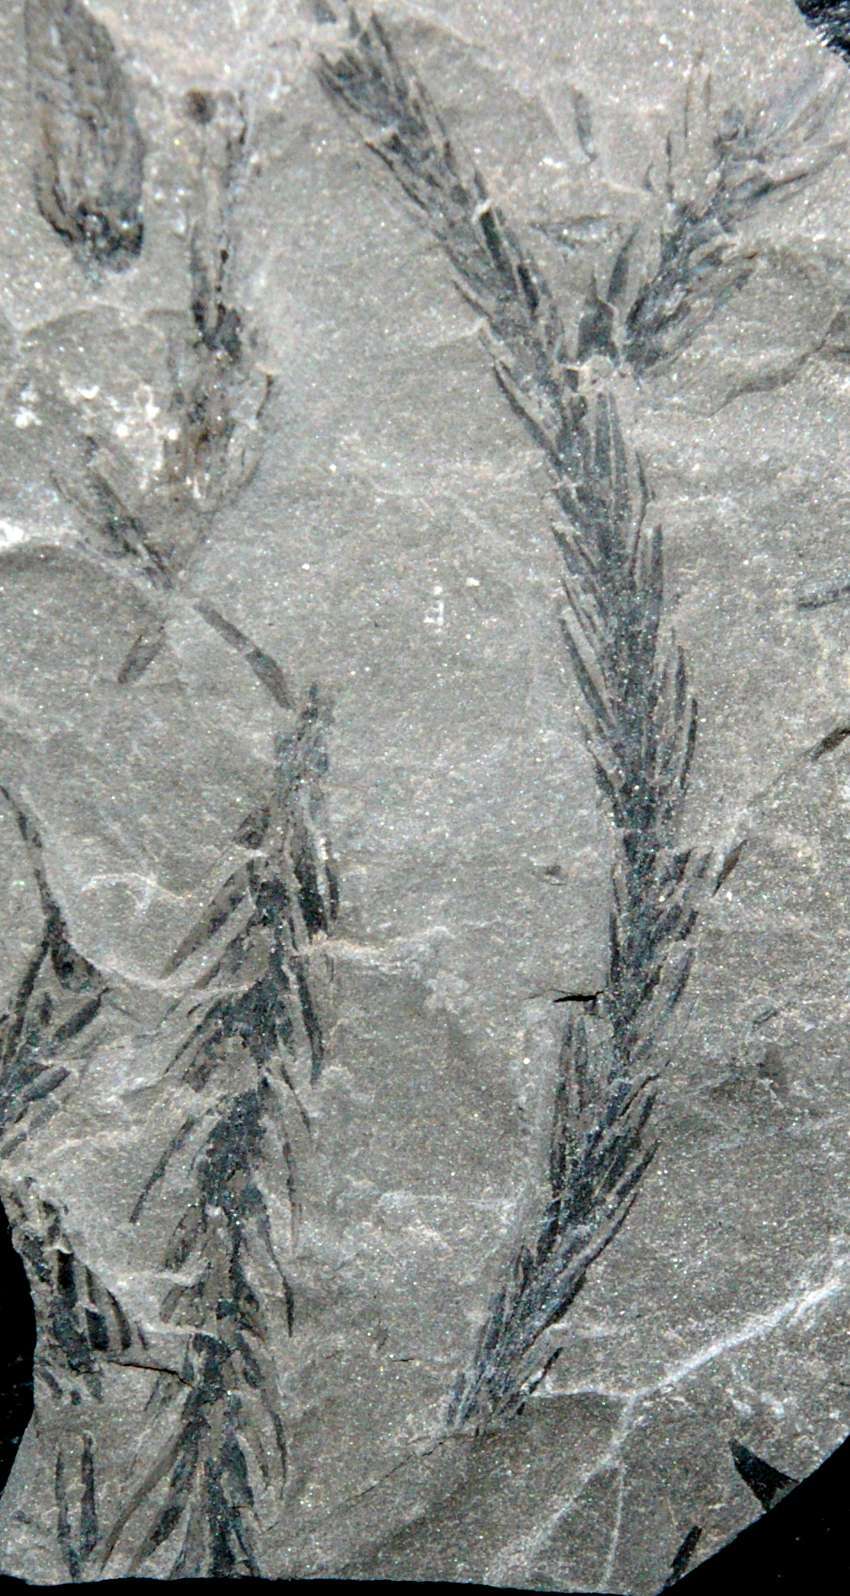 Ulodendron majus fossil plant